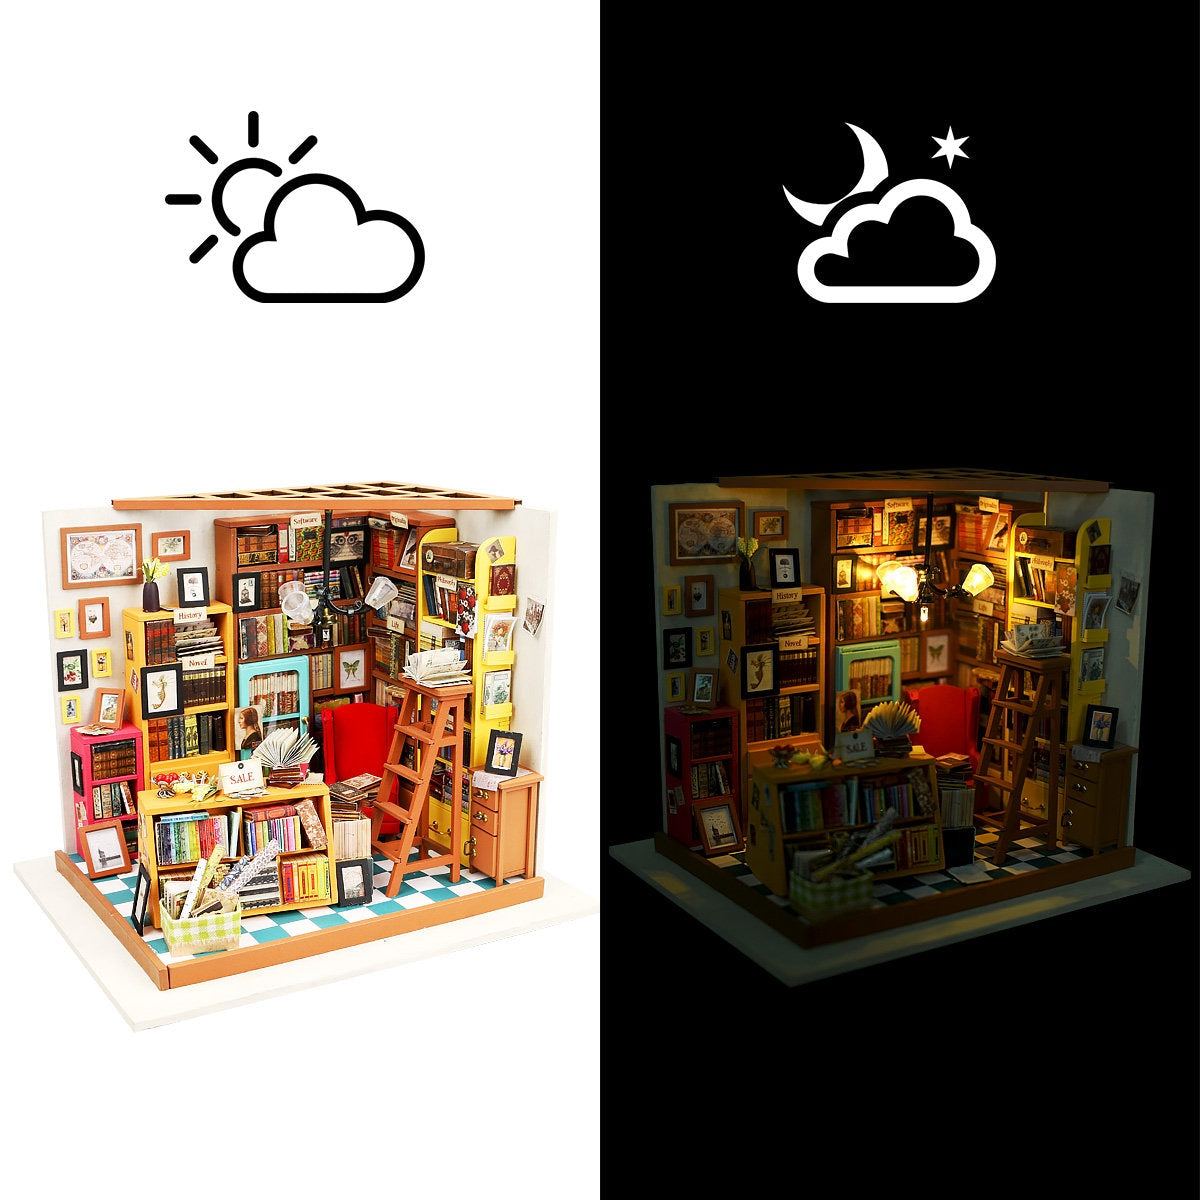 Build Your Own Library, Doll House DIY Kit, Model Set, Miniature Library Craft Kit for Adults, Mini Diorama Room with Furniture